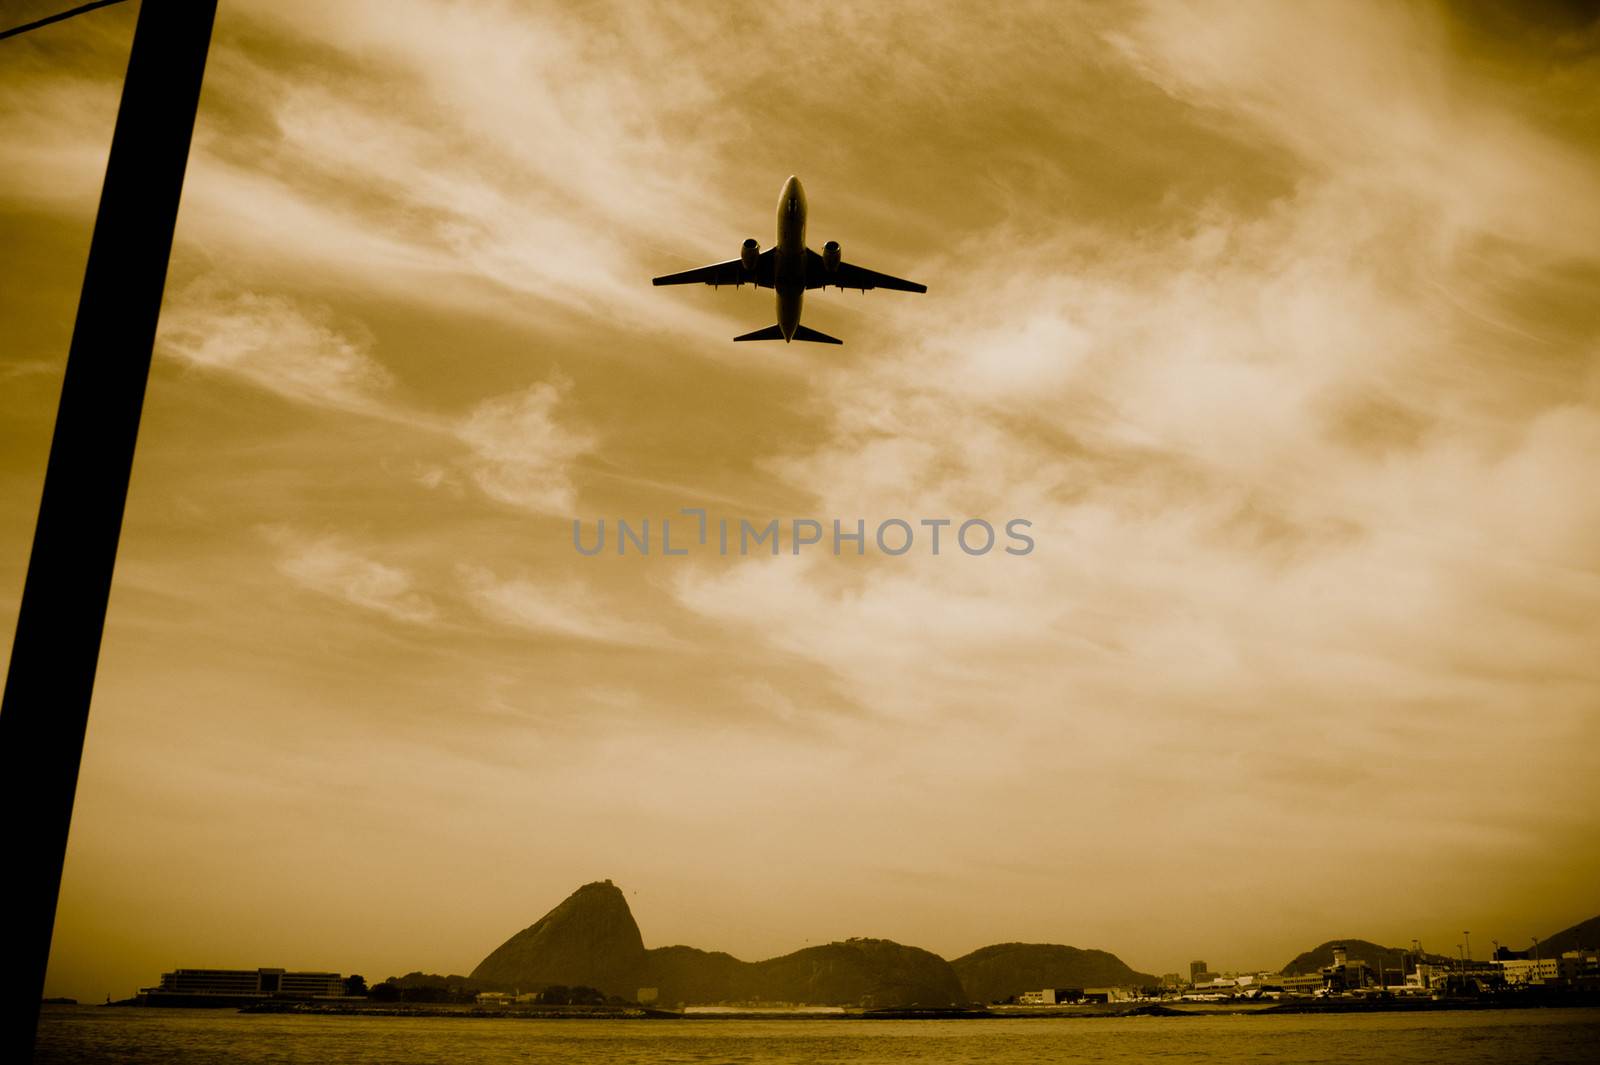 View of an airplane flying over the city of Rio de Janeiro, Brazil